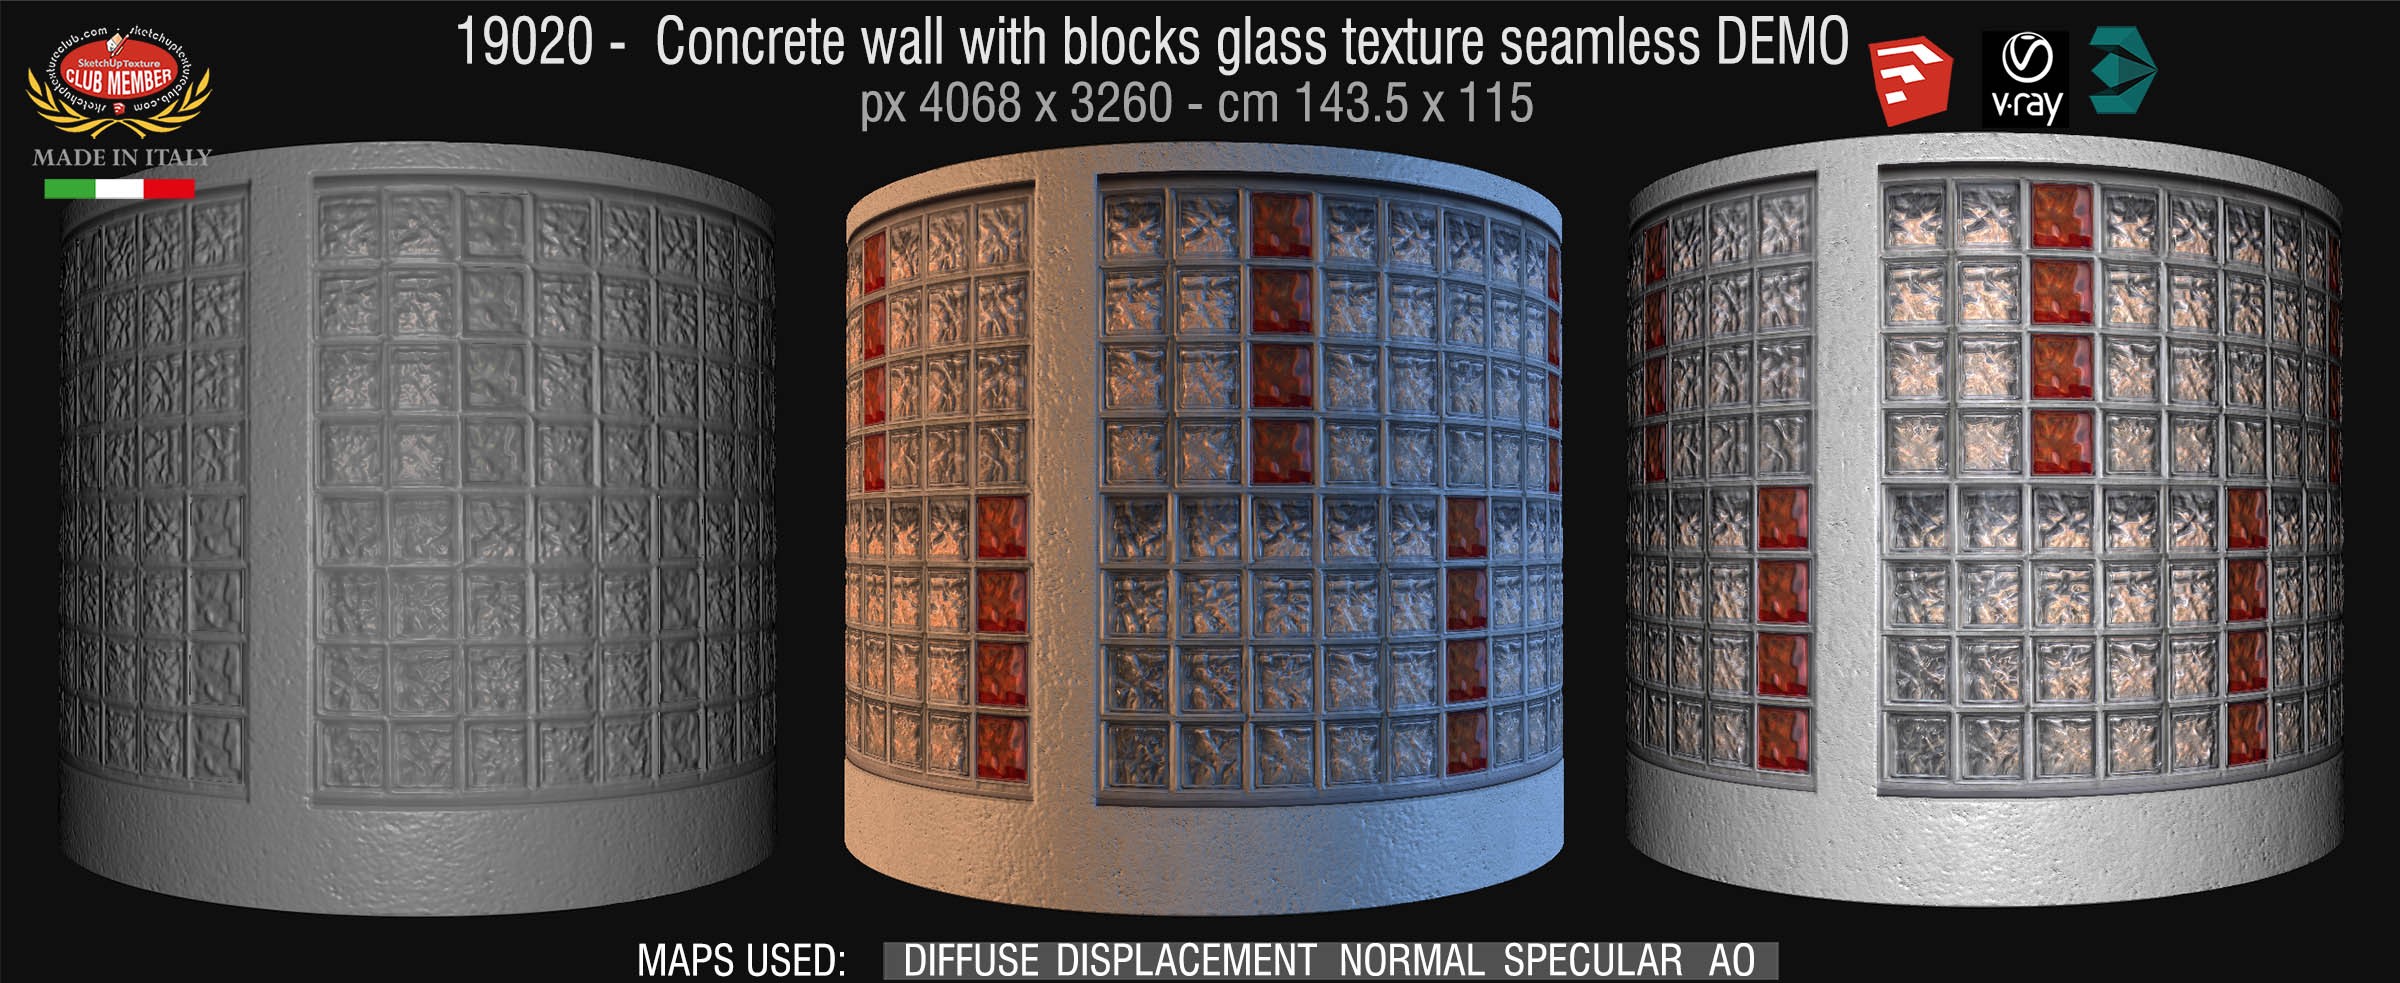 19020 Concrete wall with blocks glass texture seamless + maps DEMO